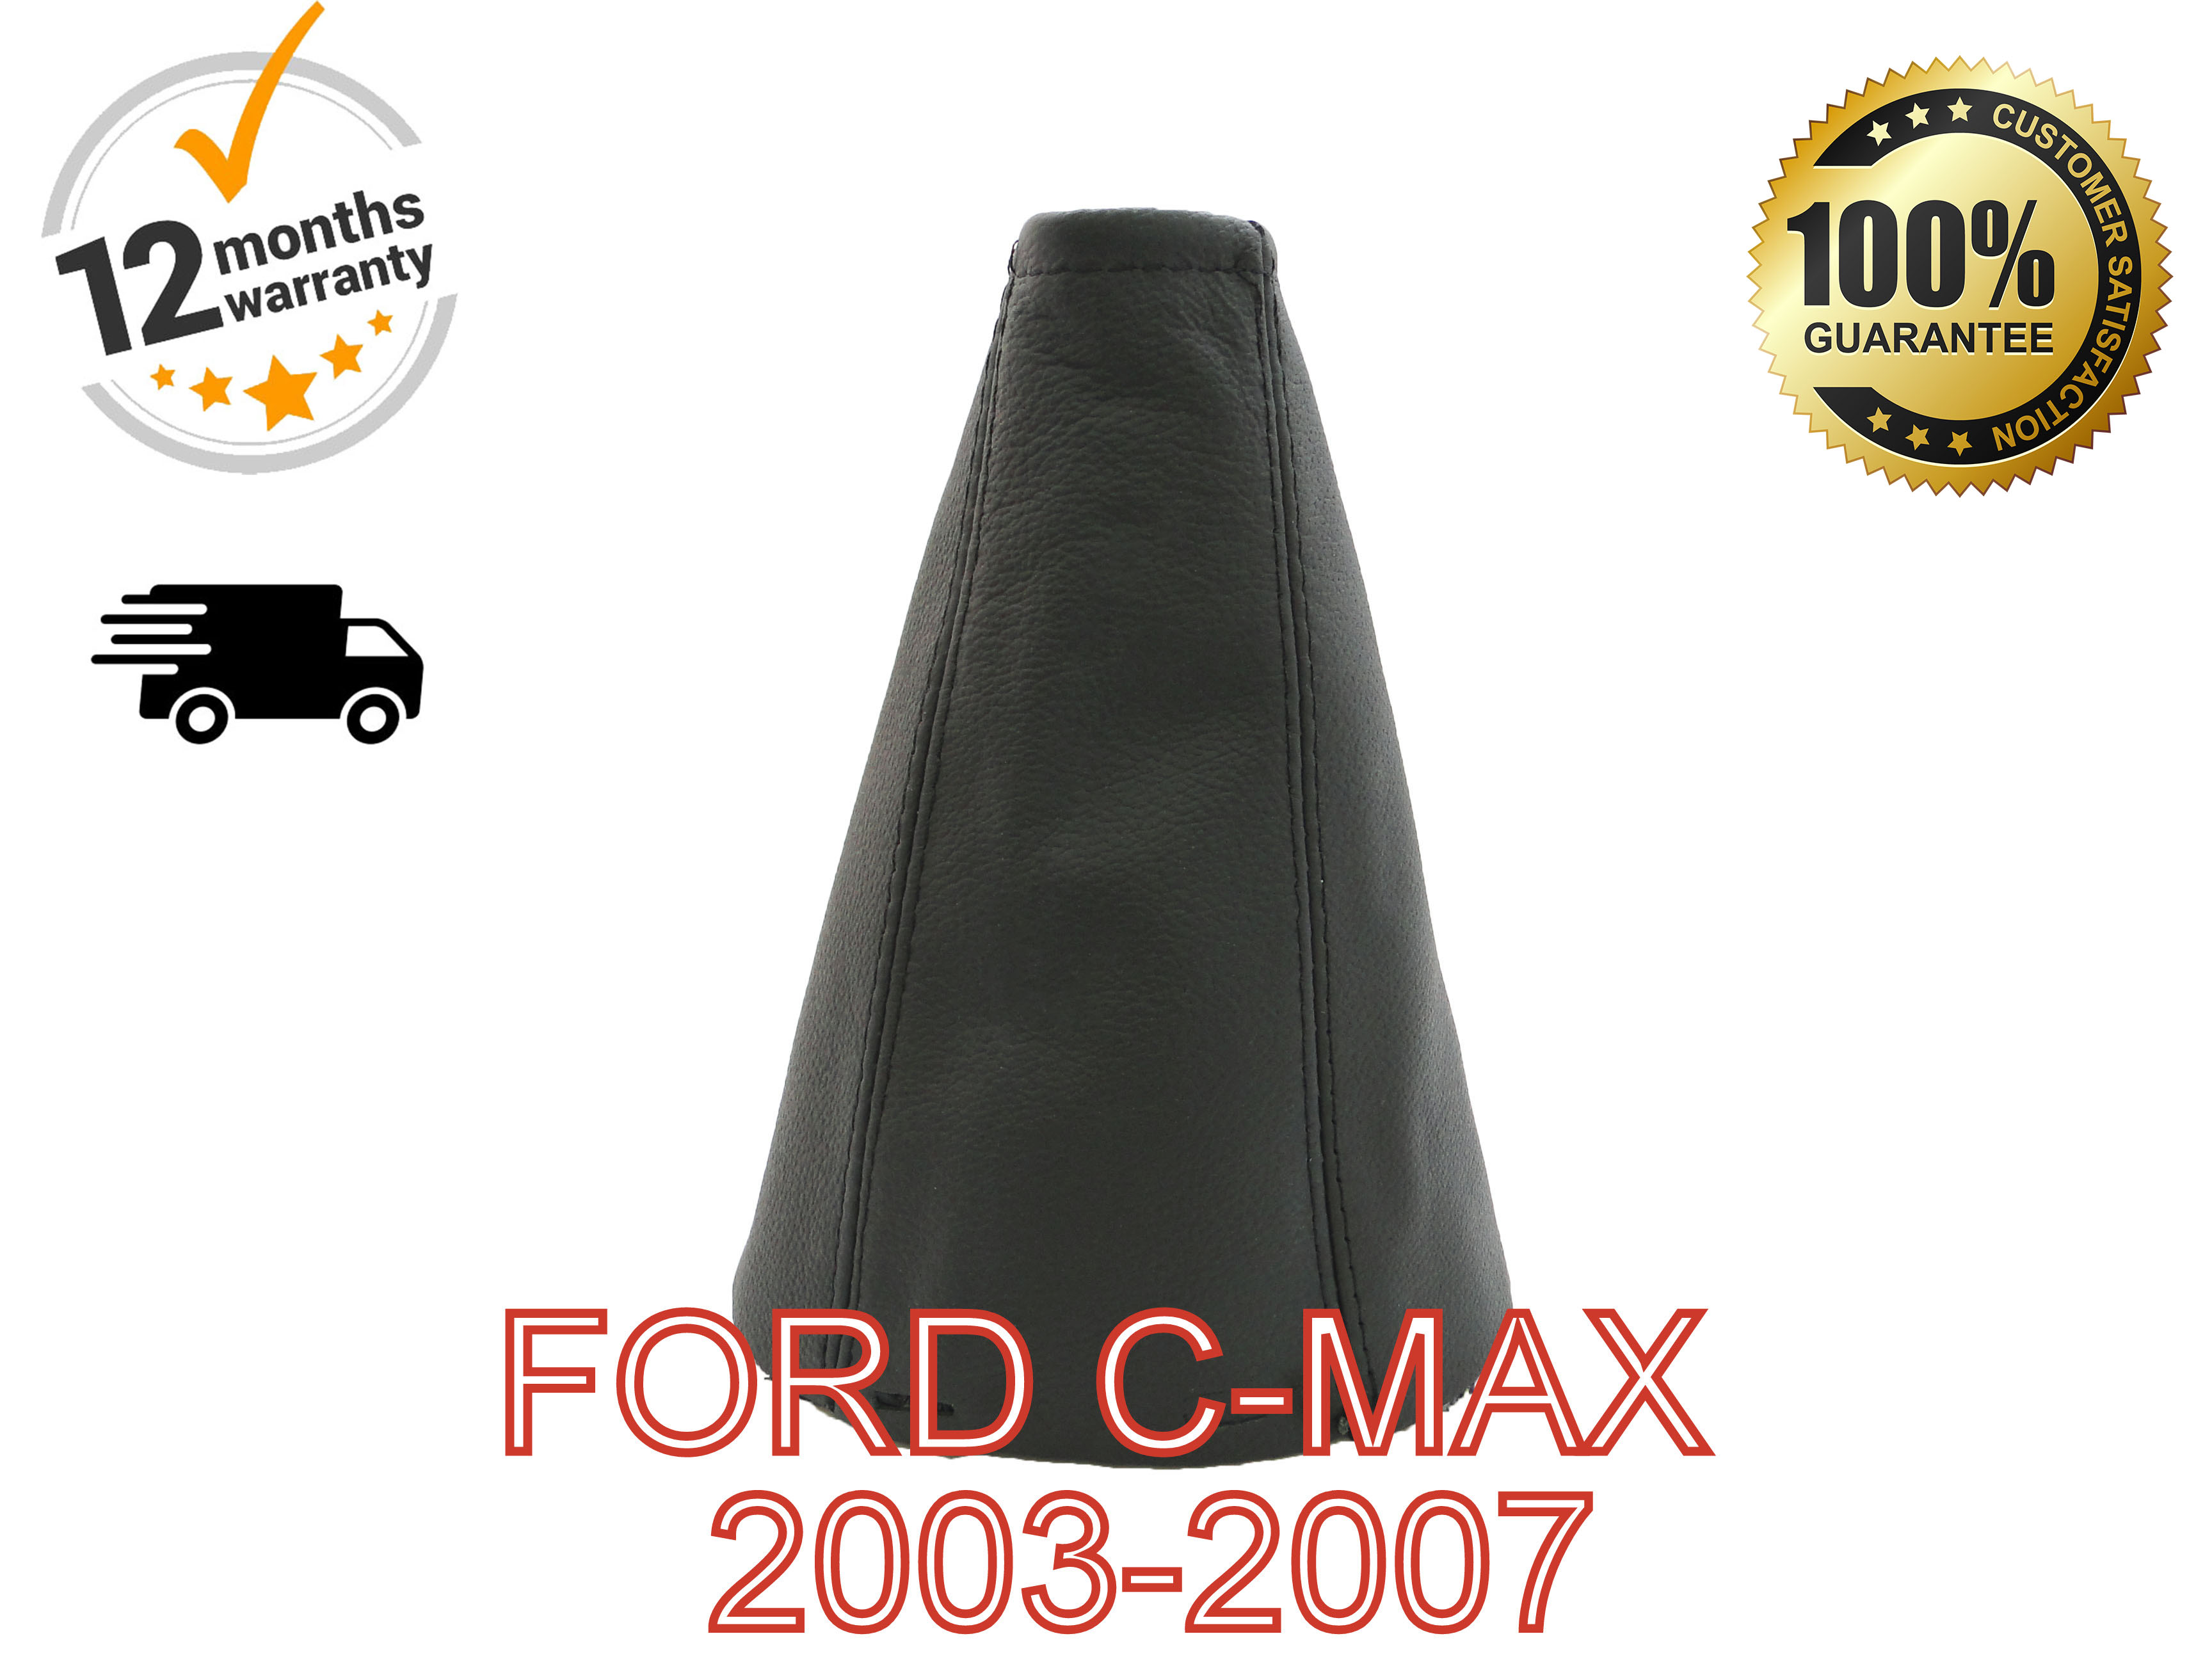 Max Cmax Other Interior Styling Vehicle Parts Accessories